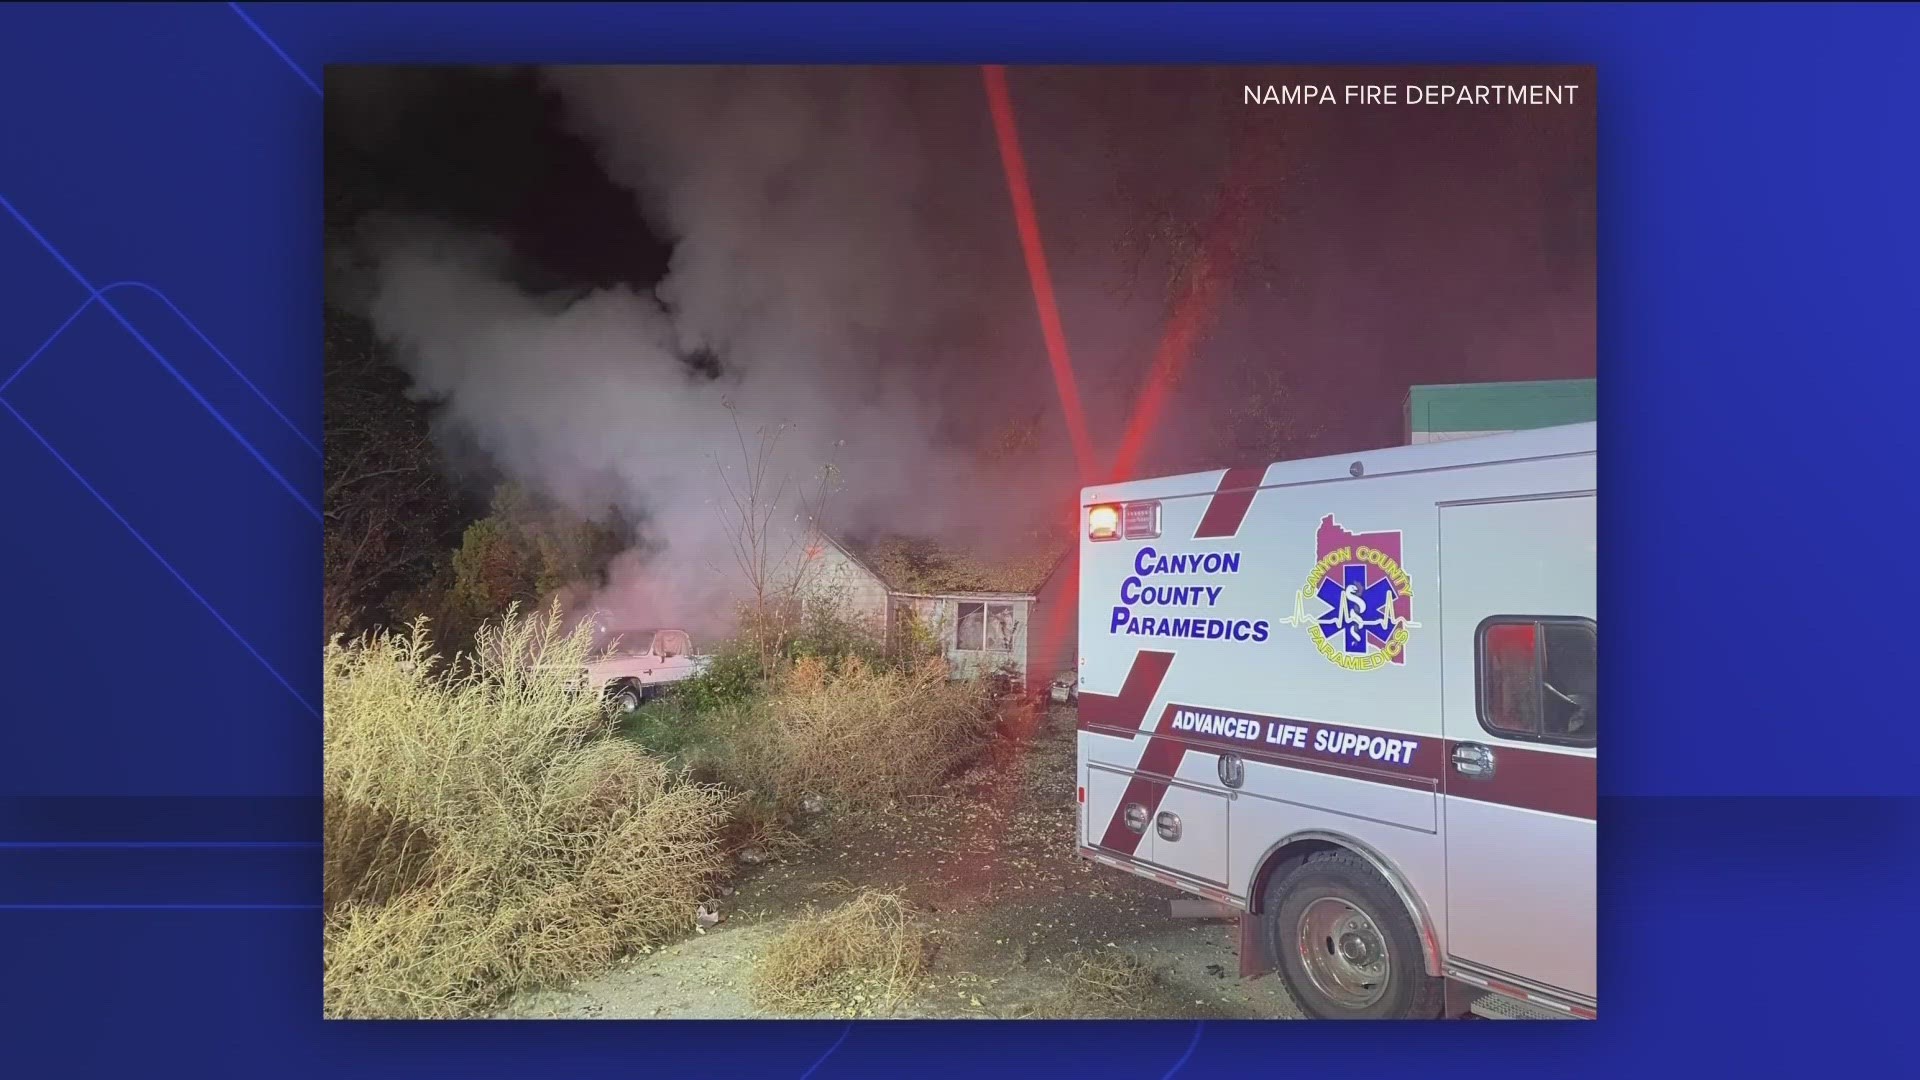 The Nampa Idaho Fire Department said the victim died before crews could get there.